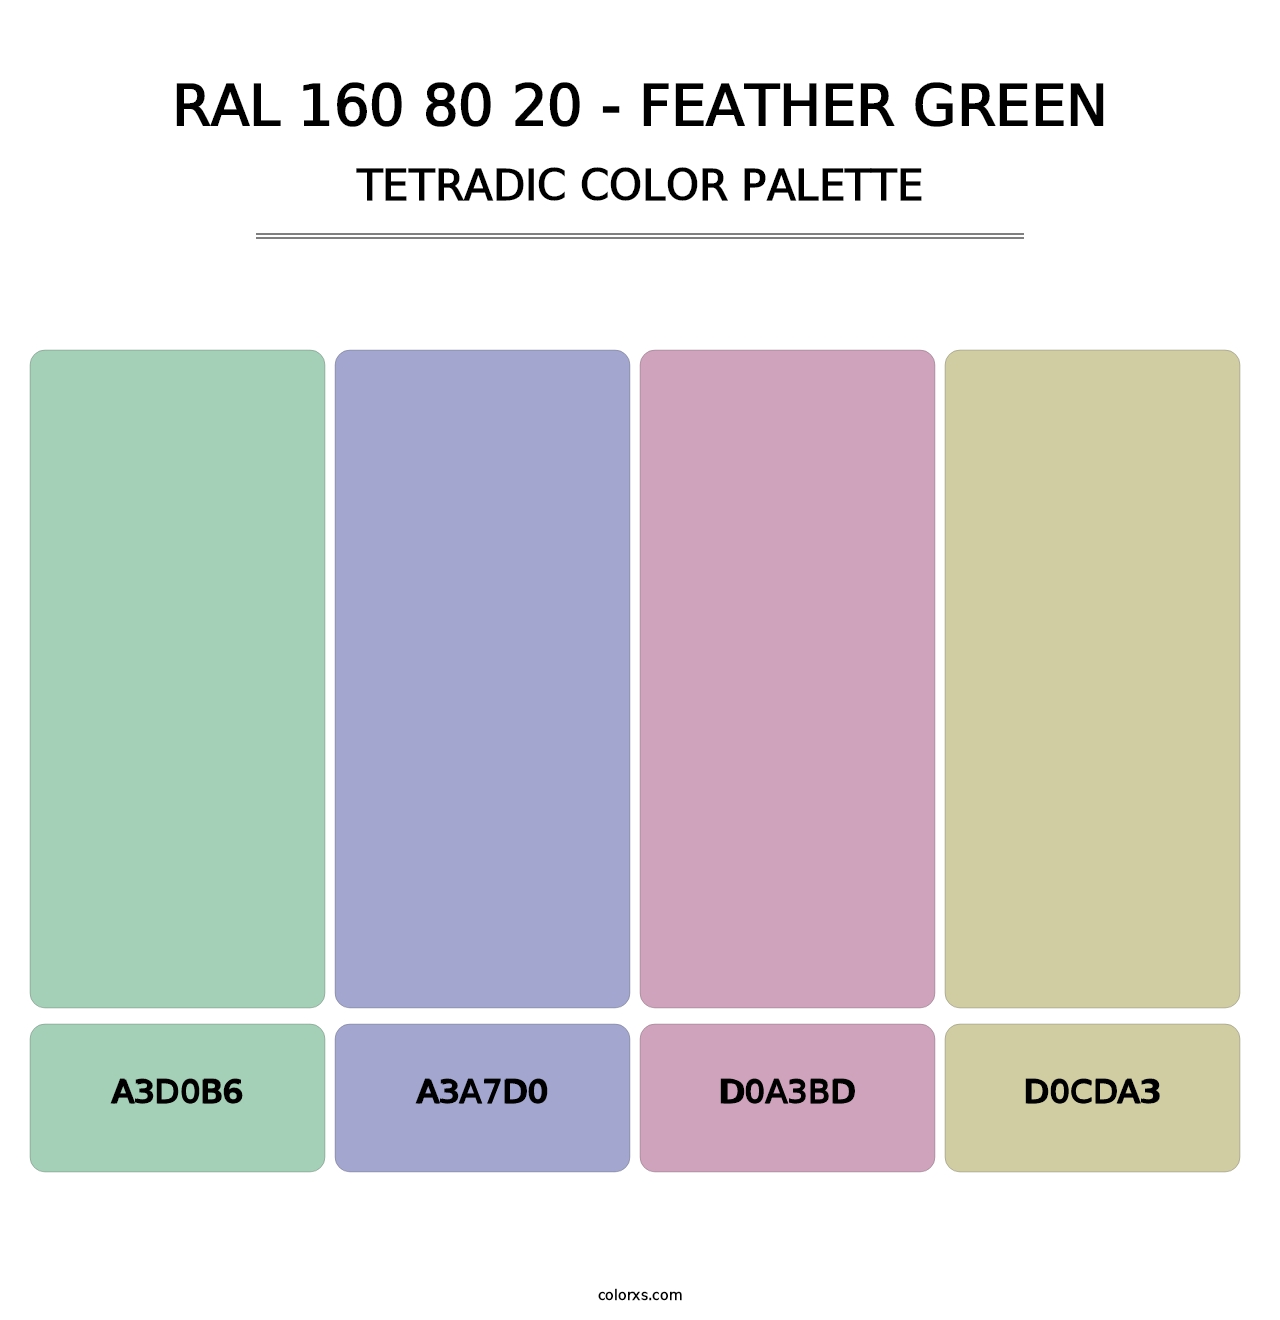 RAL 160 80 20 - Feather Green - Tetradic Color Palette